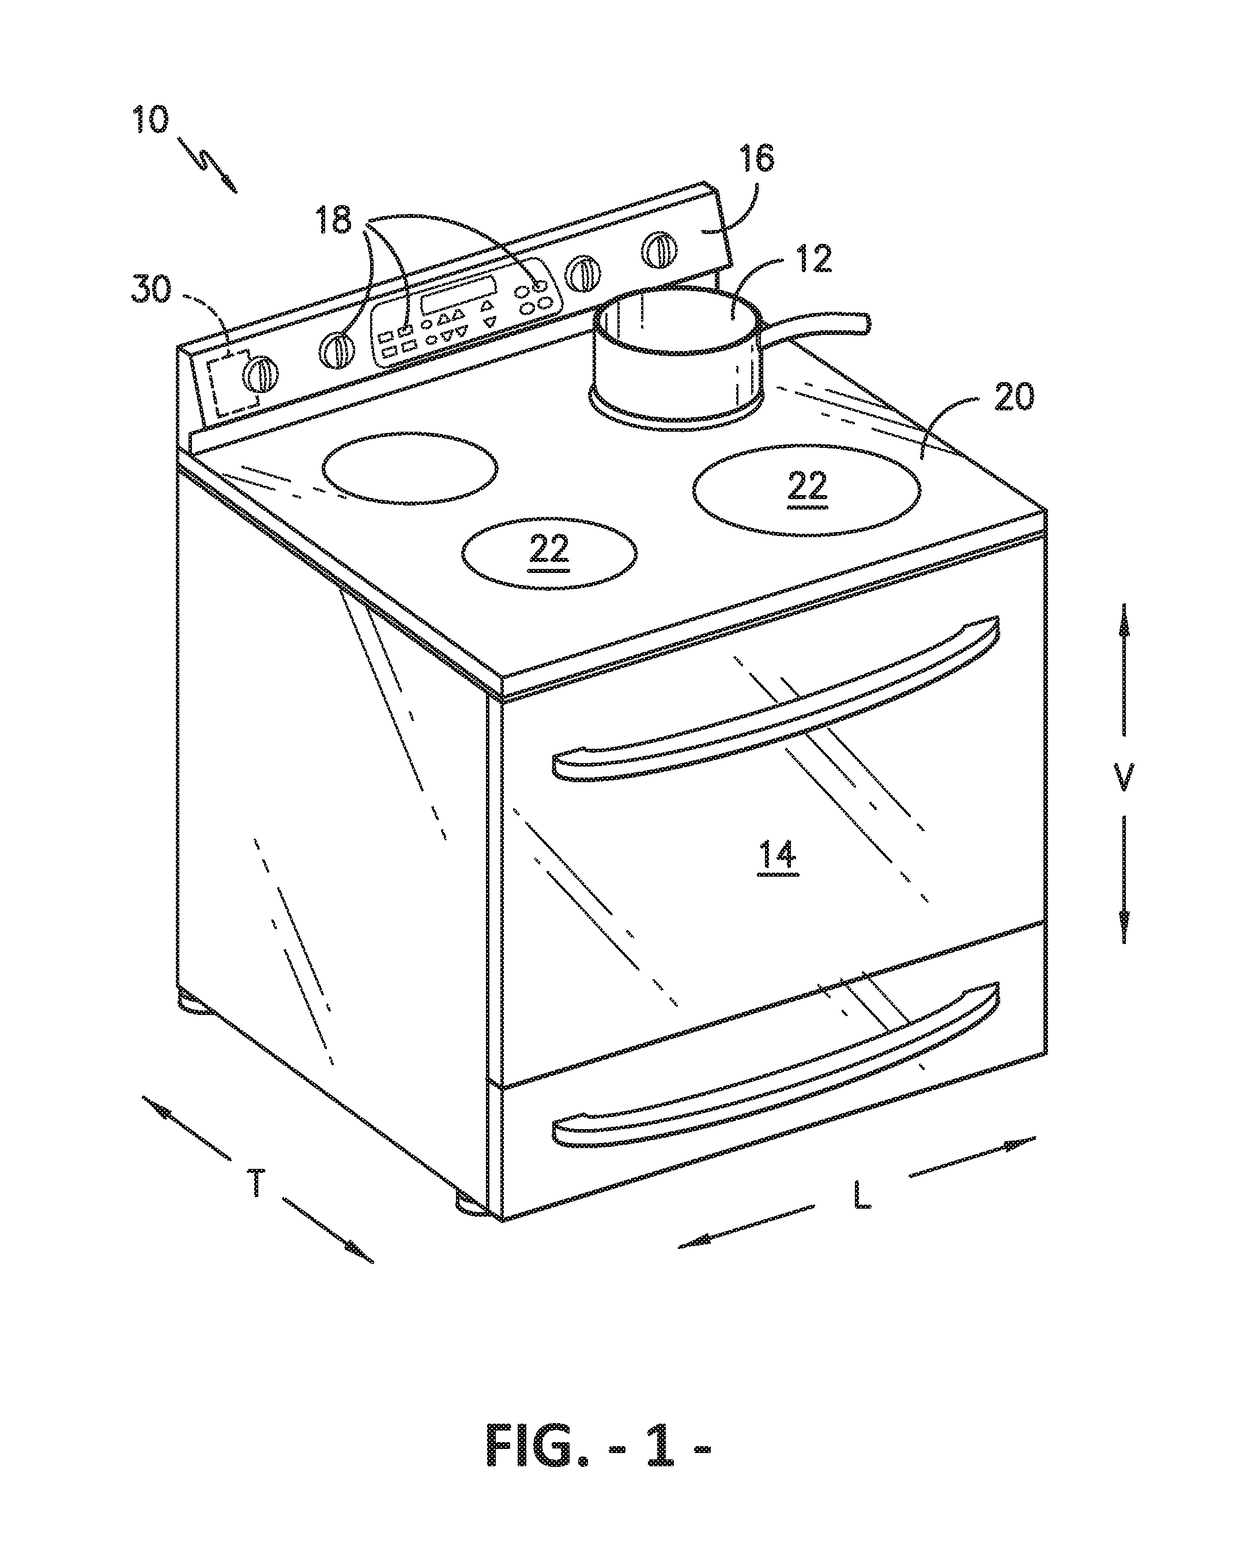 Cooking appliance and method for limiting cooking utensil temperatures using dual control modes